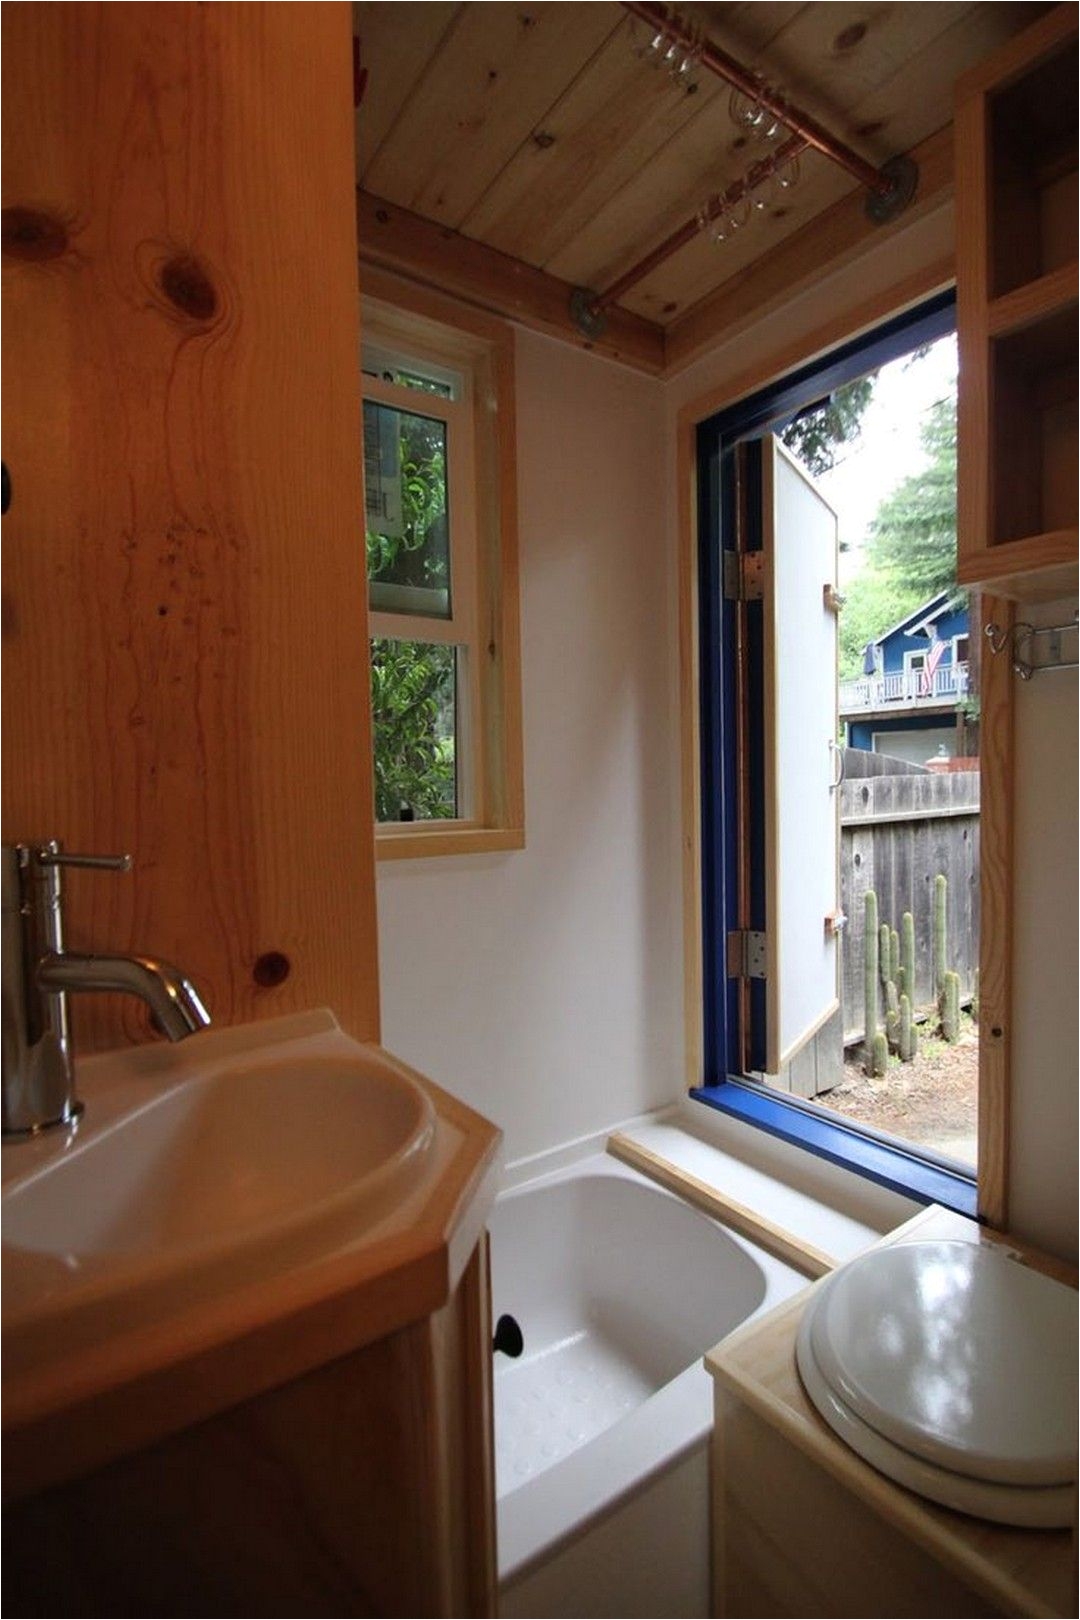 awesome tiny house bathtub small space ideas 99 inspirational photos http www